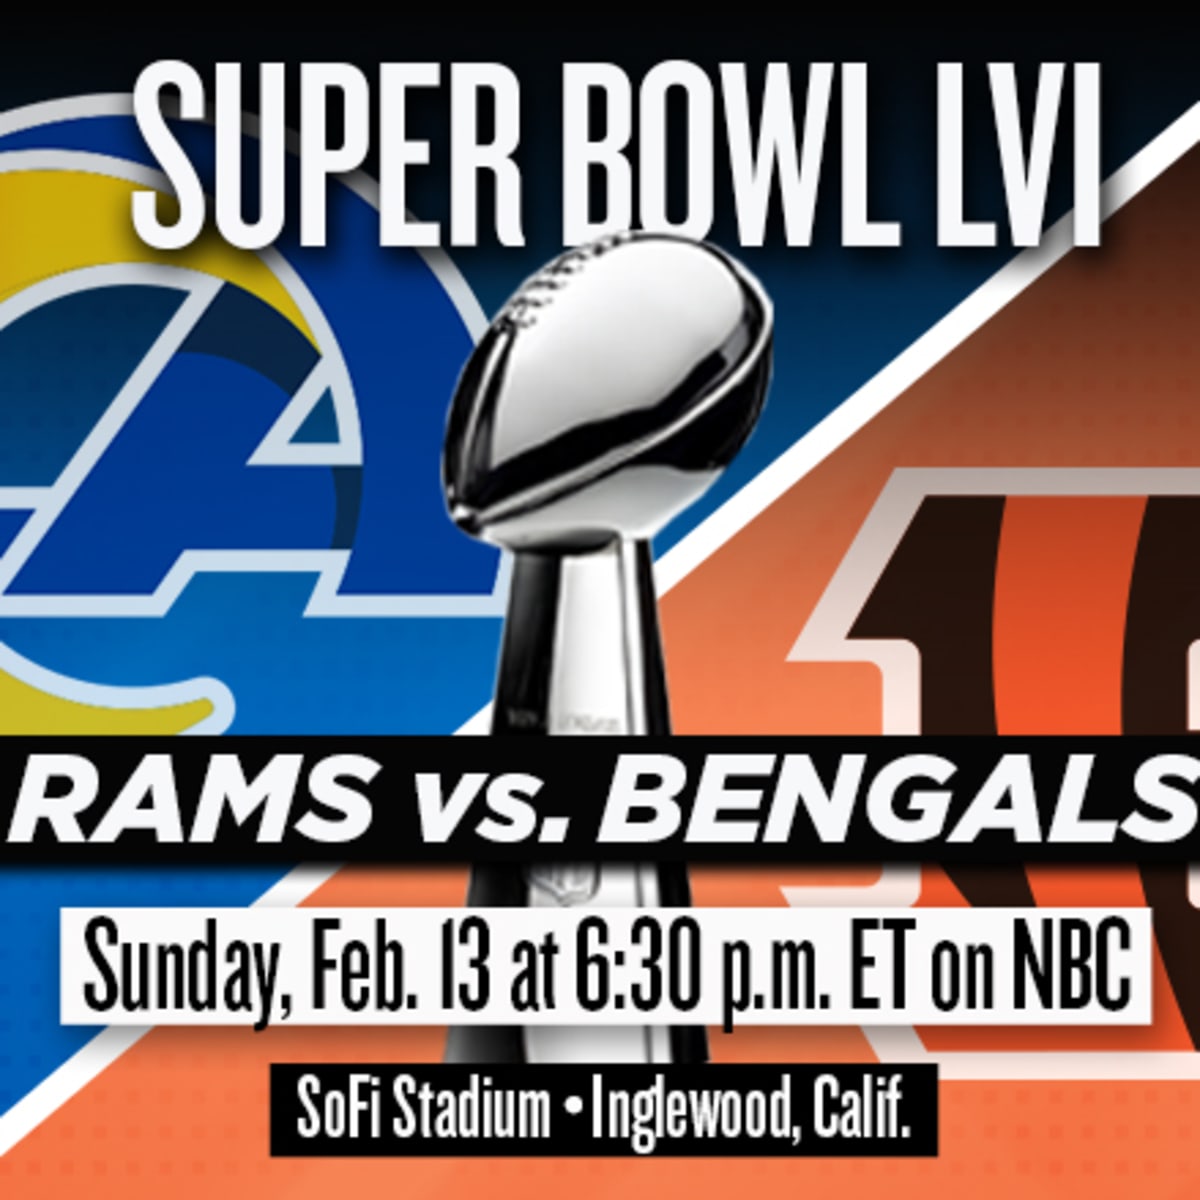 los angeles rams super bowl appearance